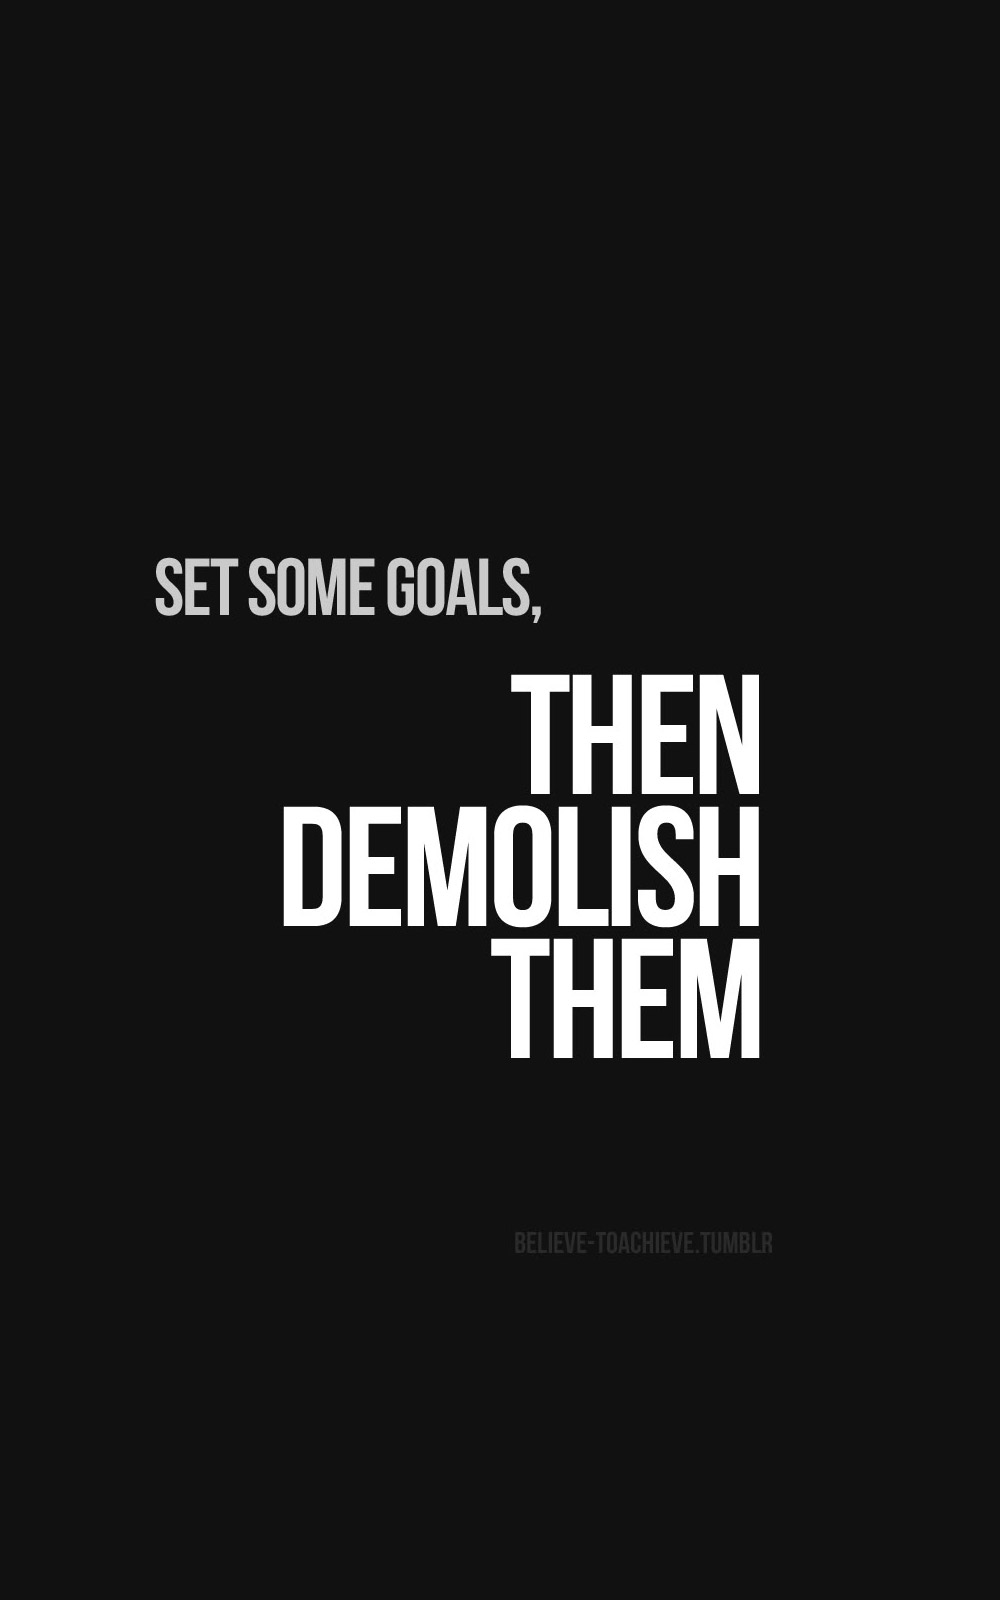 Funny Wallpaper For Mobile - Motivational Message Wallpaper About Goals -  1000x1600 Wallpaper 